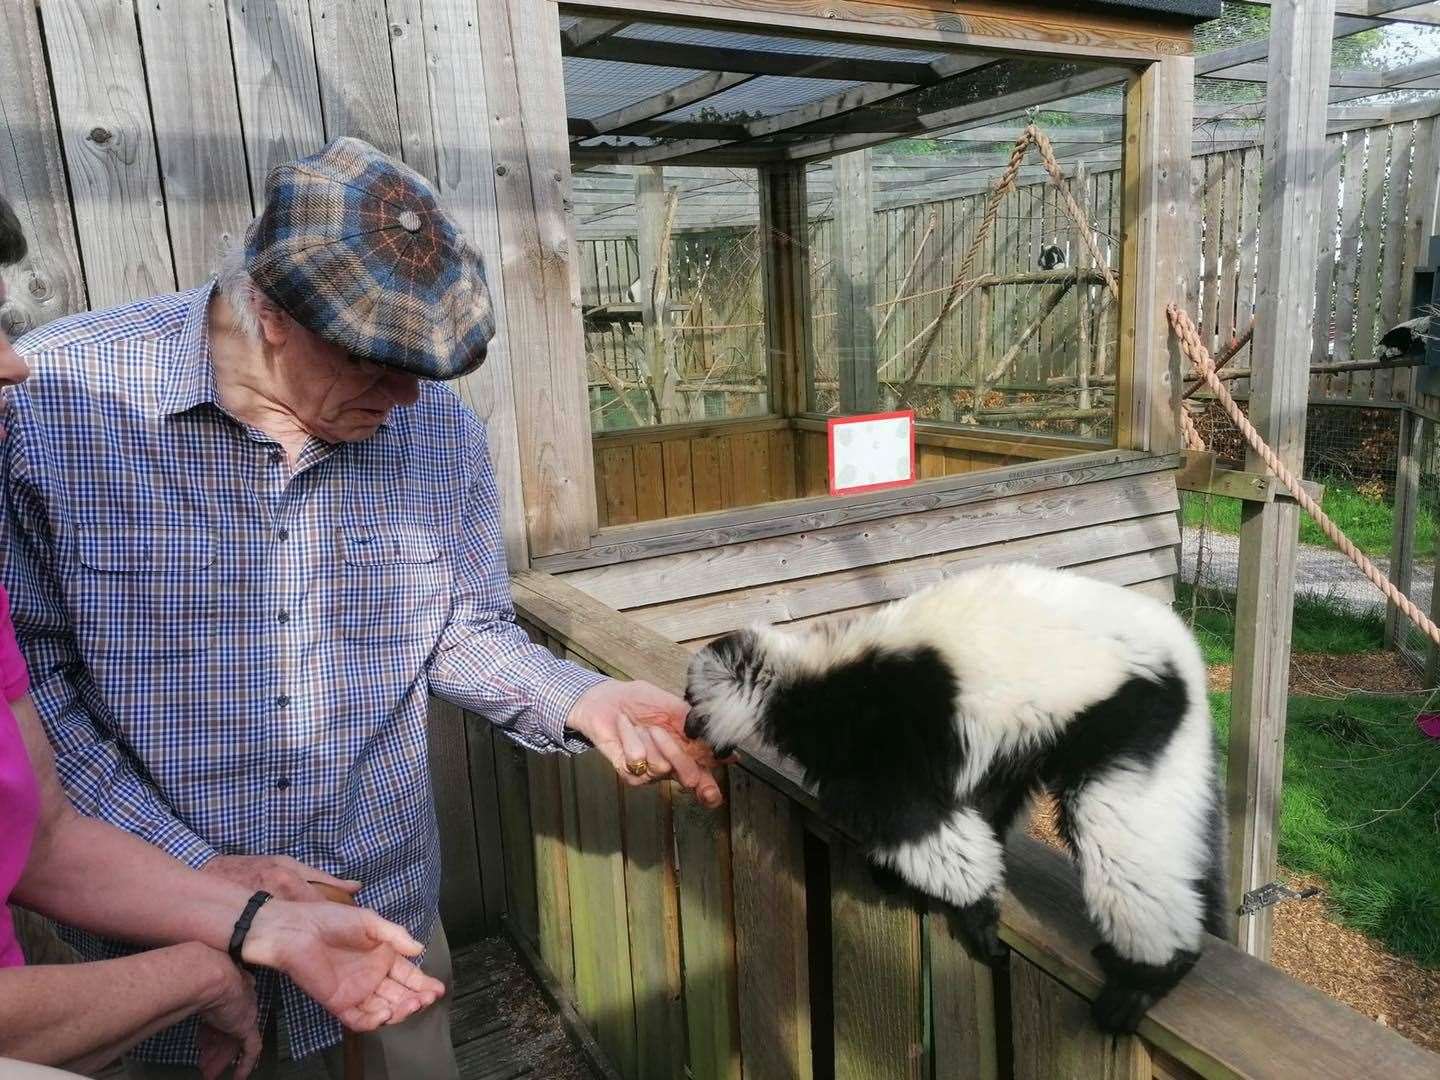 Michael Gambon returned to The Fenn Bell Inn and had a special visit with the lemurs